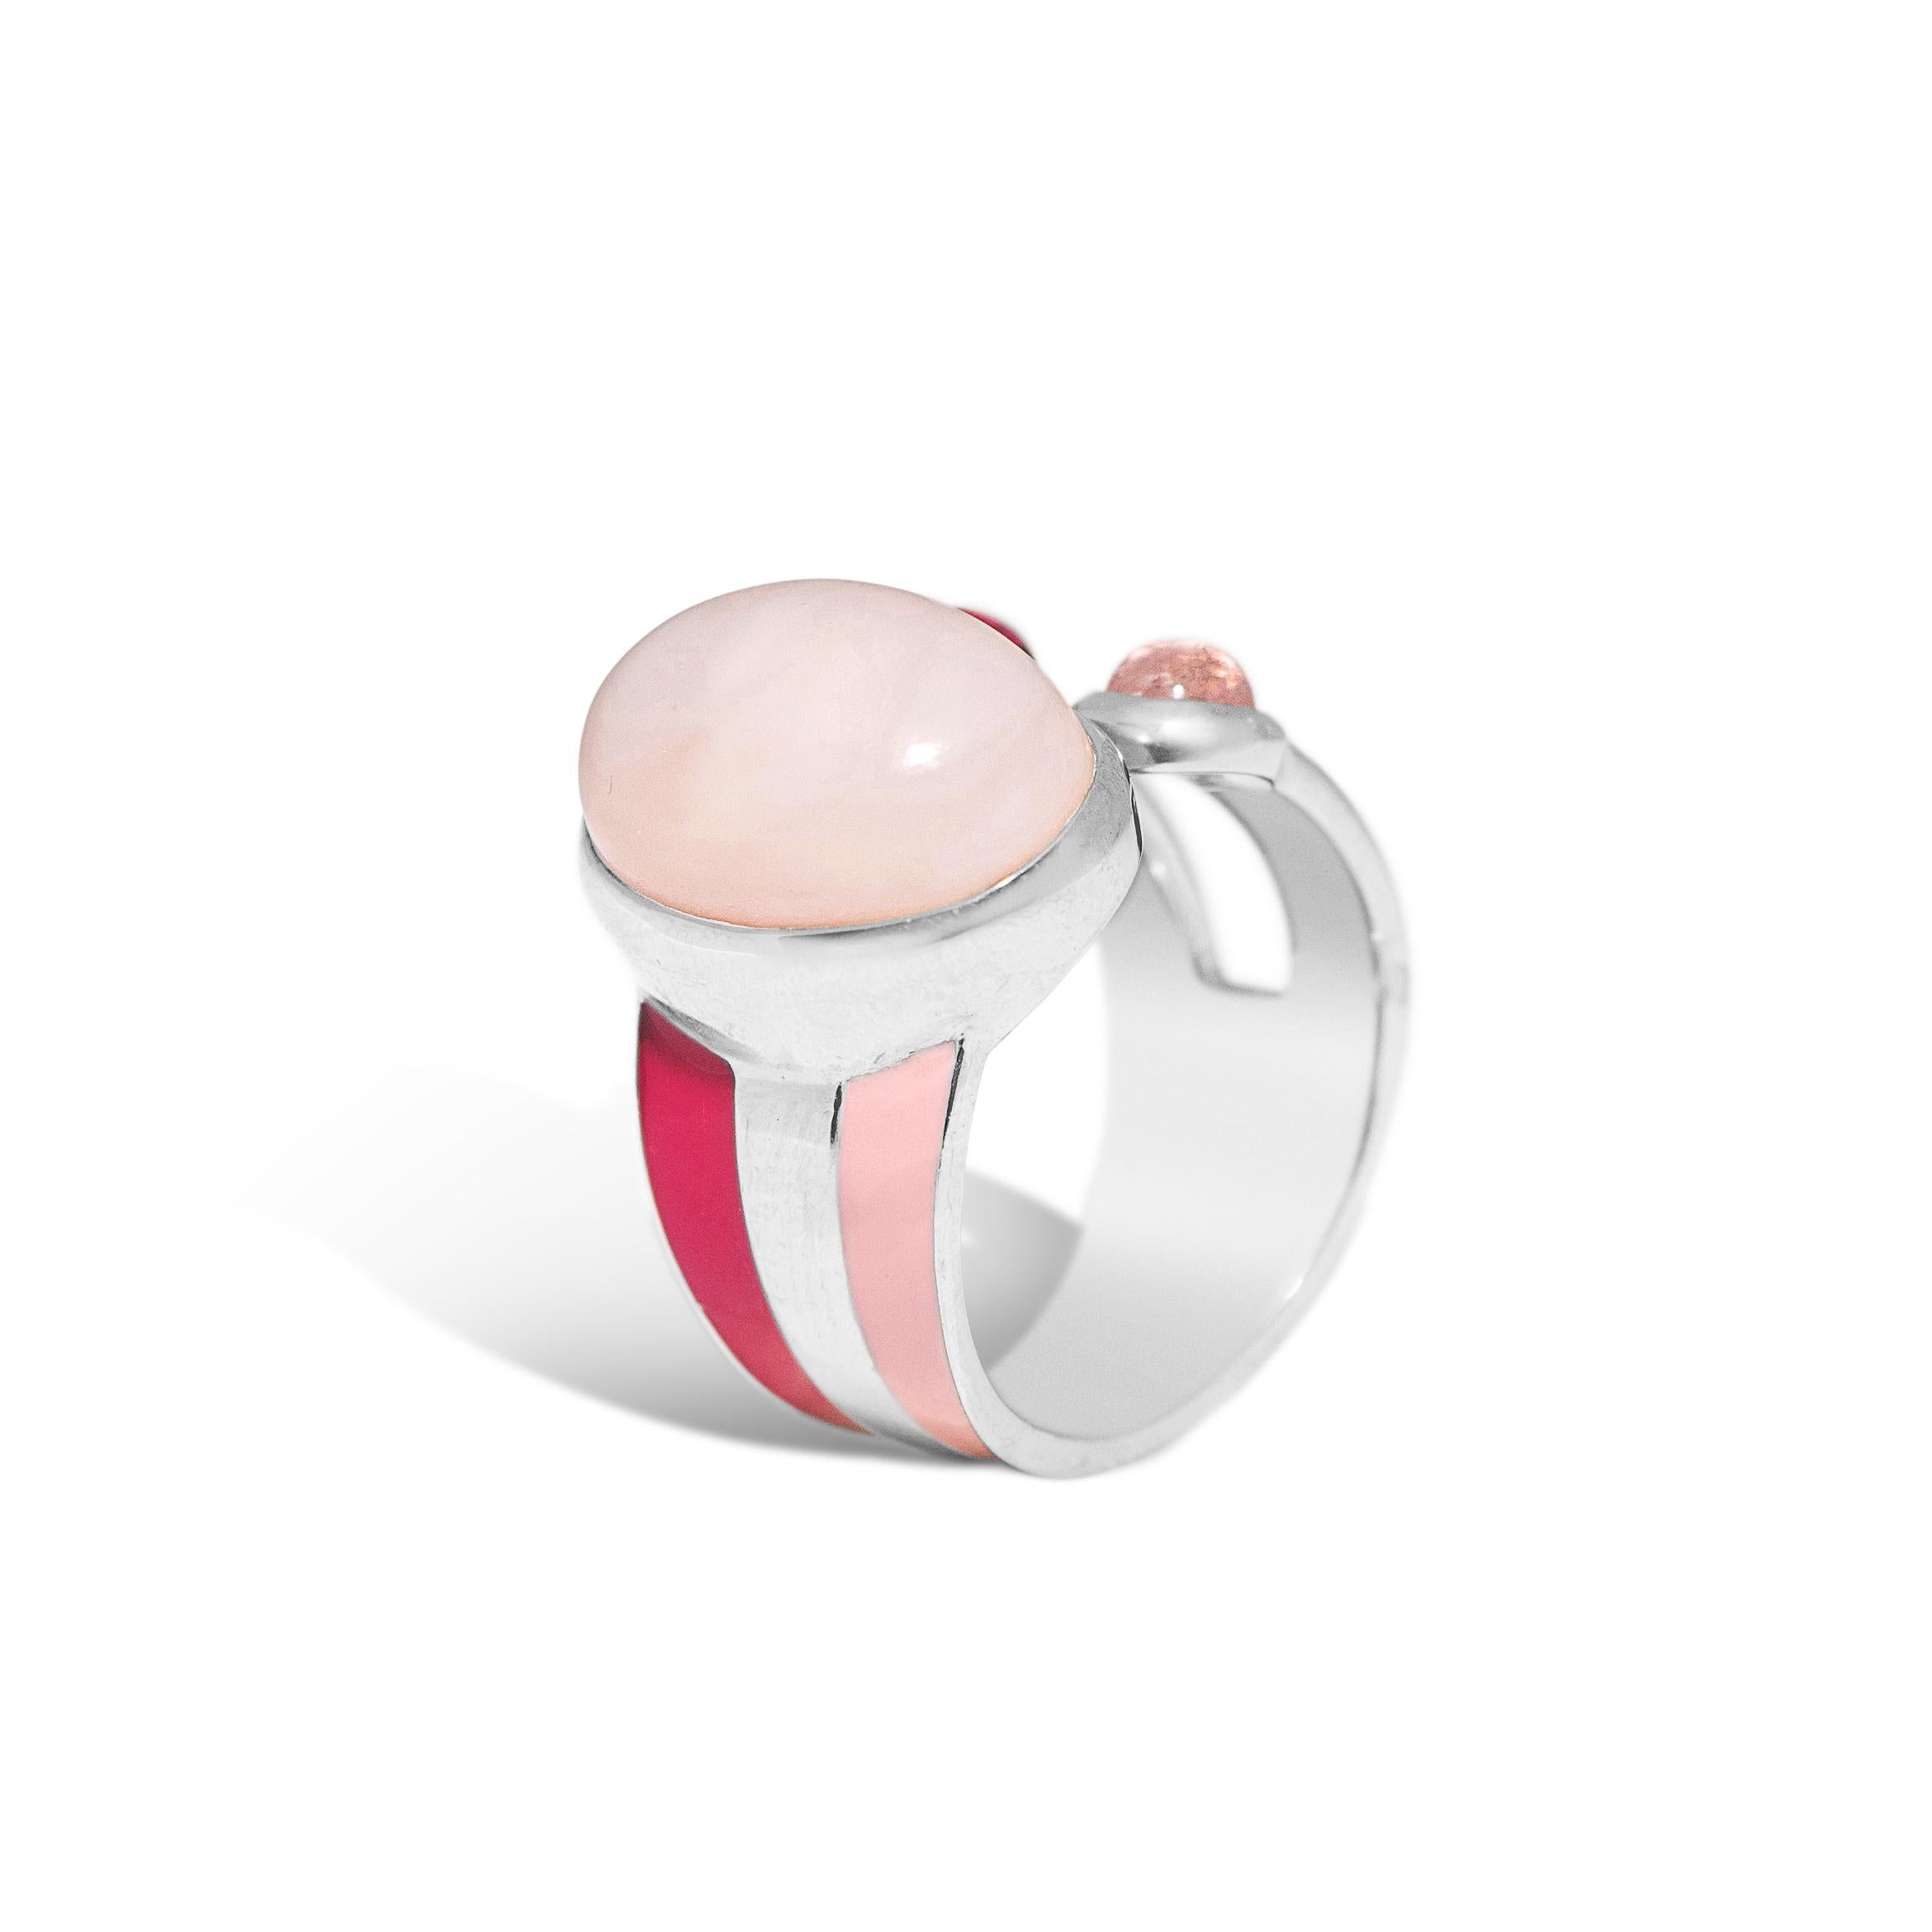 The Pink Striped Ring in polished sterling silver and pink enamel, set with pink tourmaline stones and pink agate
The design is inspired by the stripe pattern. We are all in love with stripes, so why not wearing striped jewellery too?
SIZE UKK 1/2